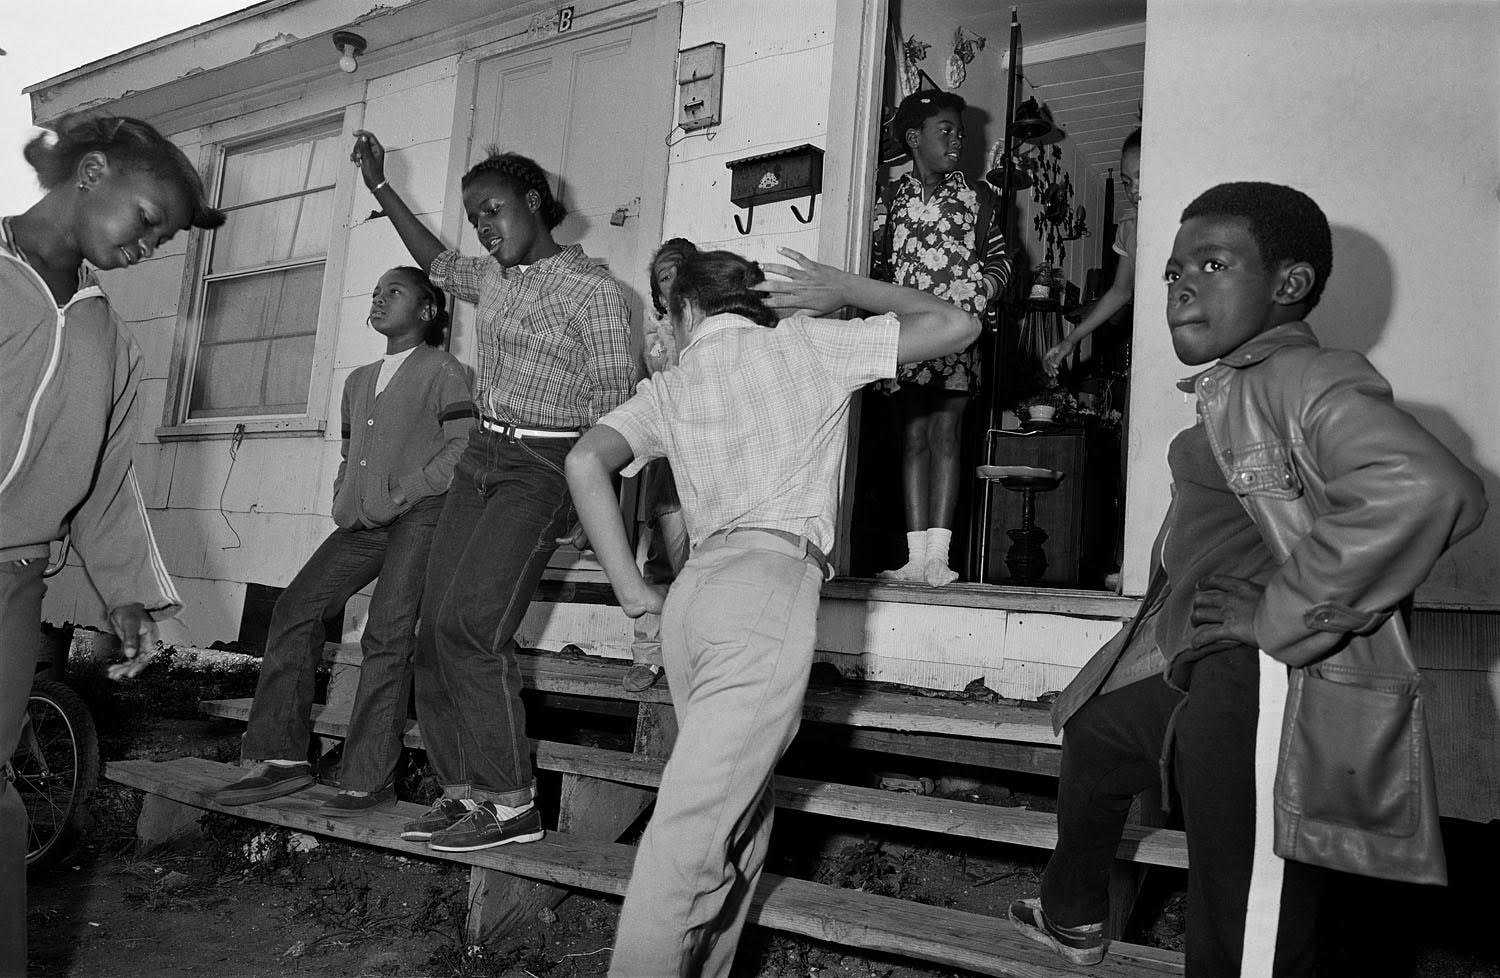   Belle Glade, Florida, 1981; printed 2023   Gelatin Silver Print  12 x 18 1/4 in. (image size)  The Do Good Fund Inc., 2023-008 